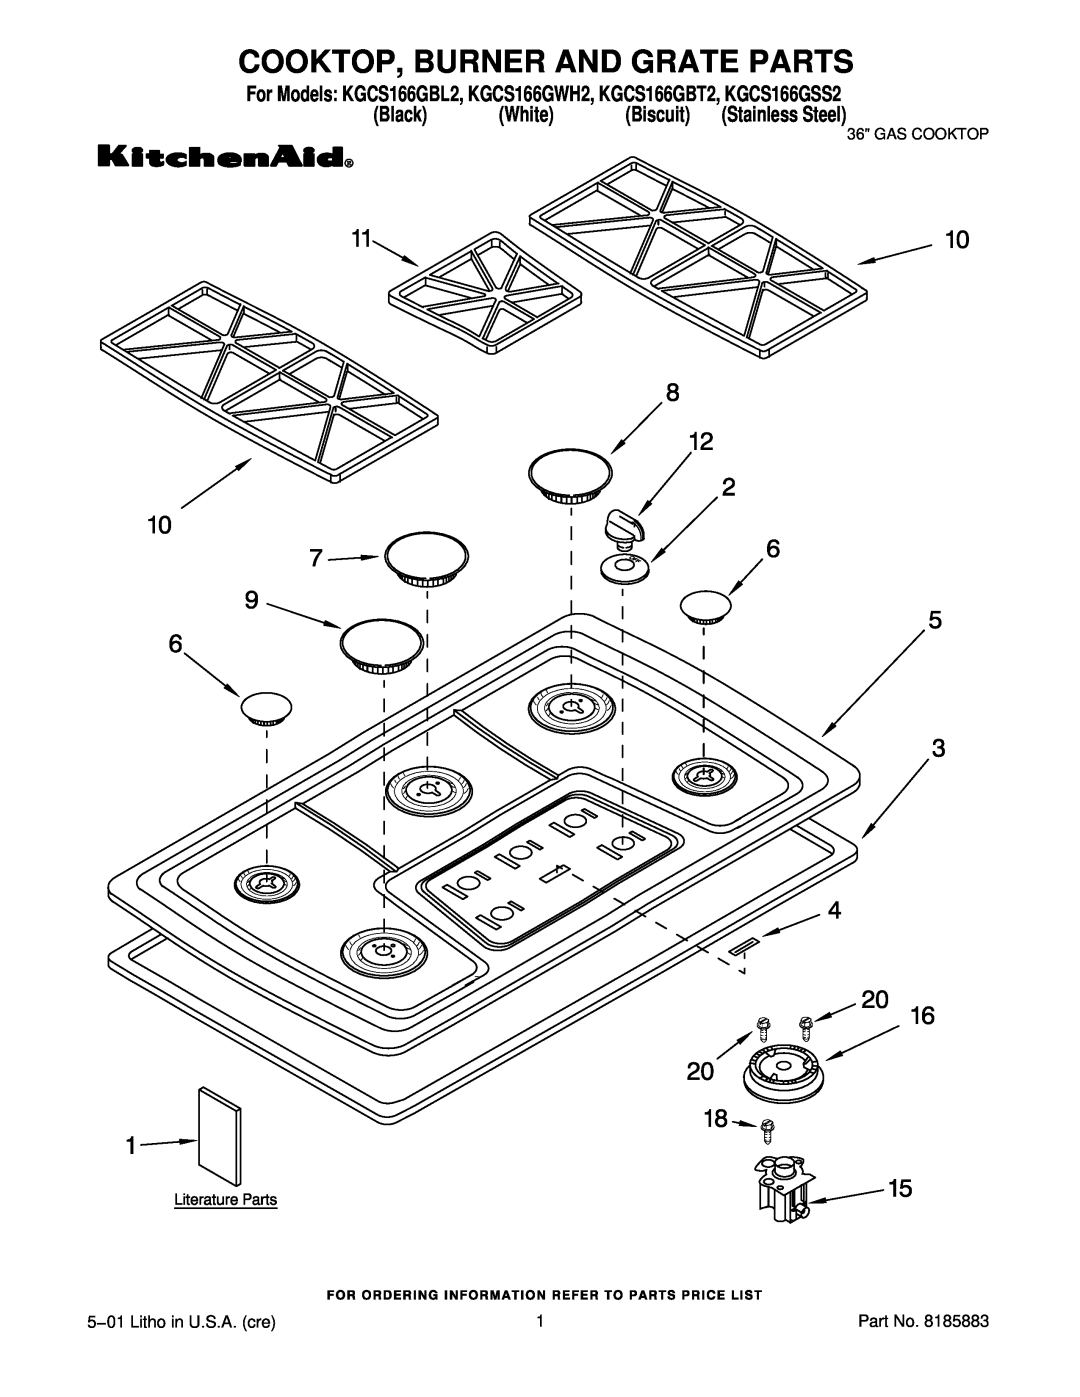 KitchenAid KGCS166GWH2 manual Cooktop, Burner And Grate Parts, Black, White, Biscuit, Stainless Steel, Gas Cooktop 